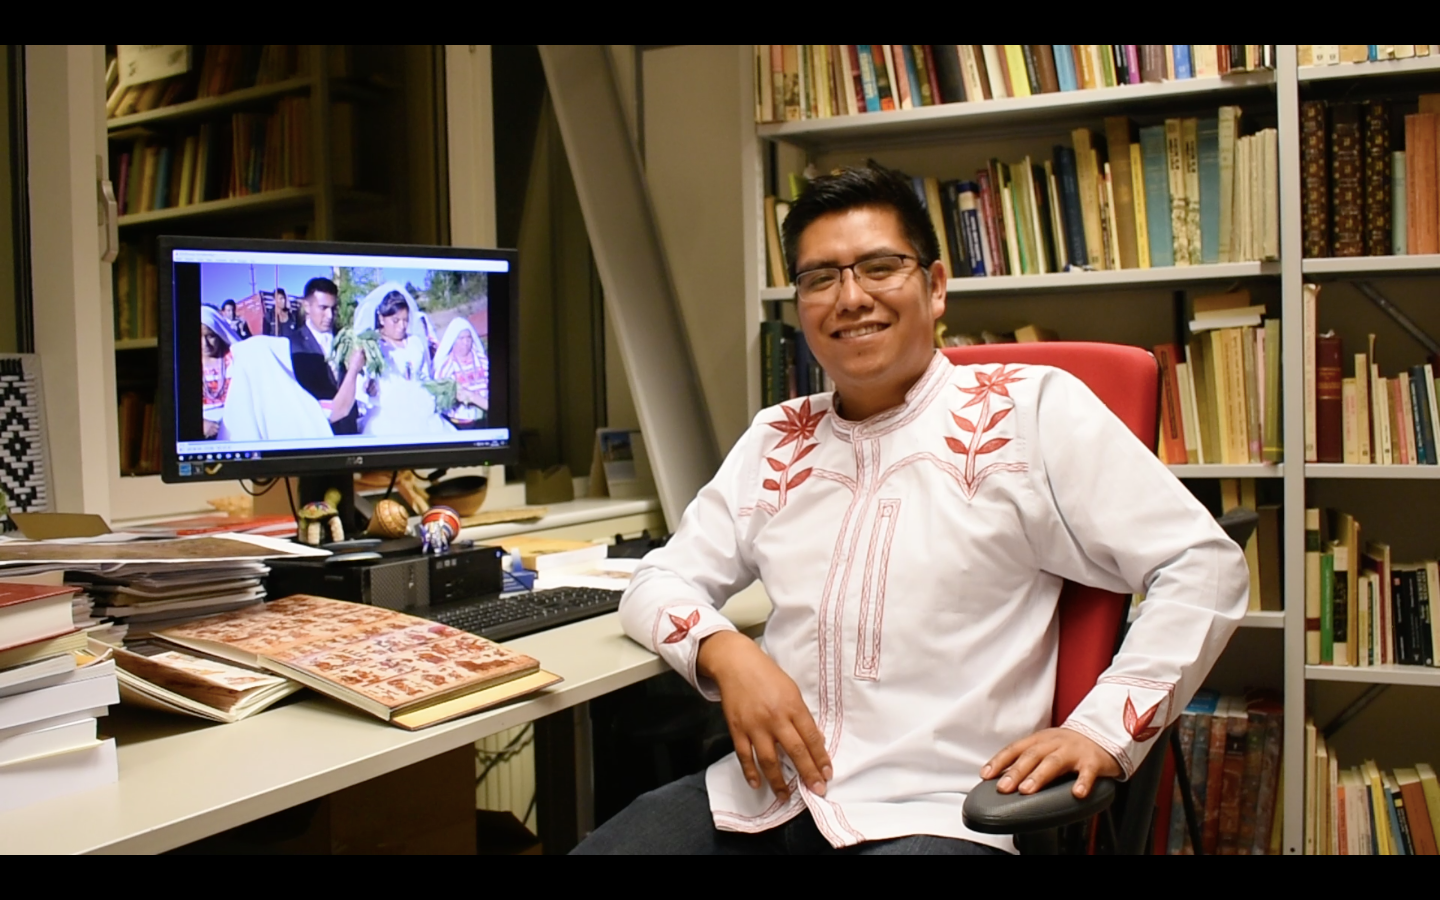 Aguilar poses at an office desk, in front of a computer showing a wedding scene.